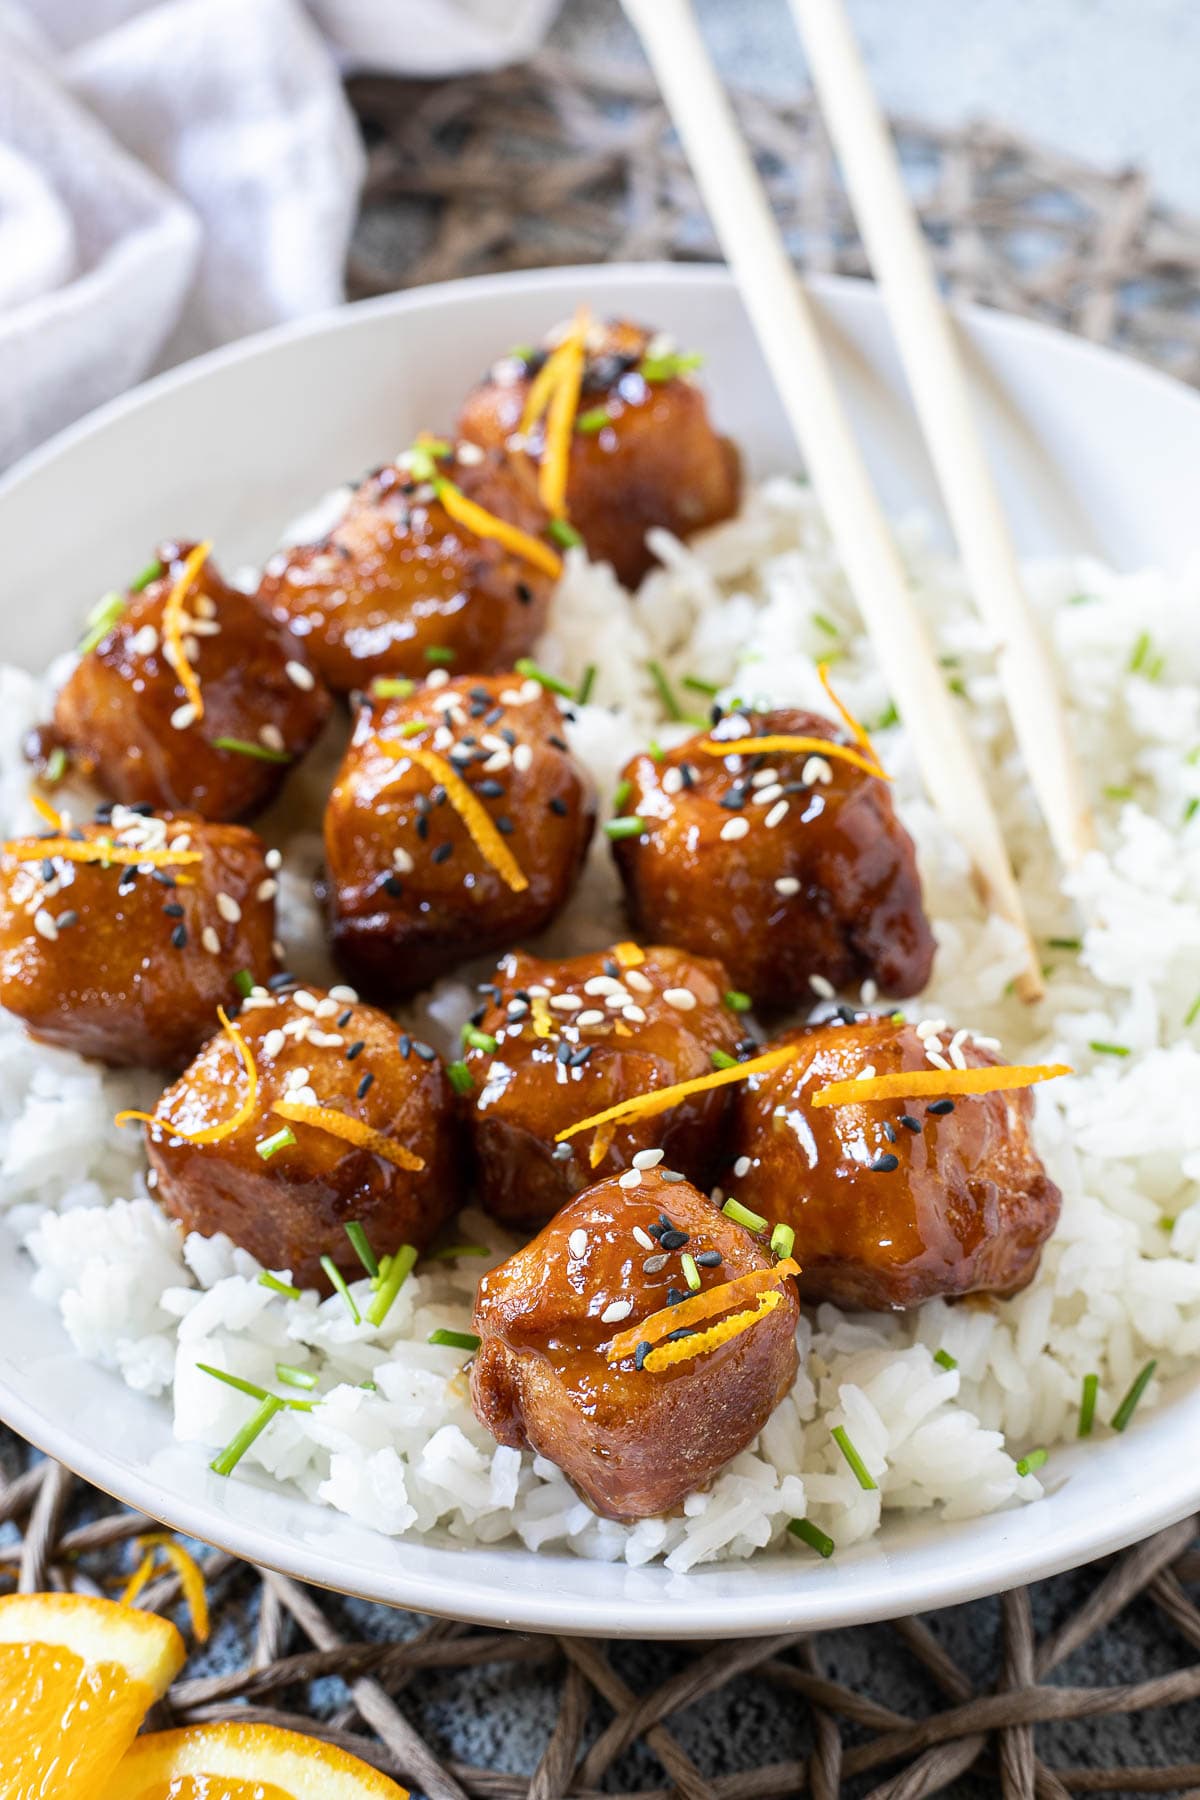 Sticky brown breaded tofu cubes are served on top of rice in a white bowl. It is sprinkled with chopped chives and sesame seeds. Chopsticks are placed on the rice.